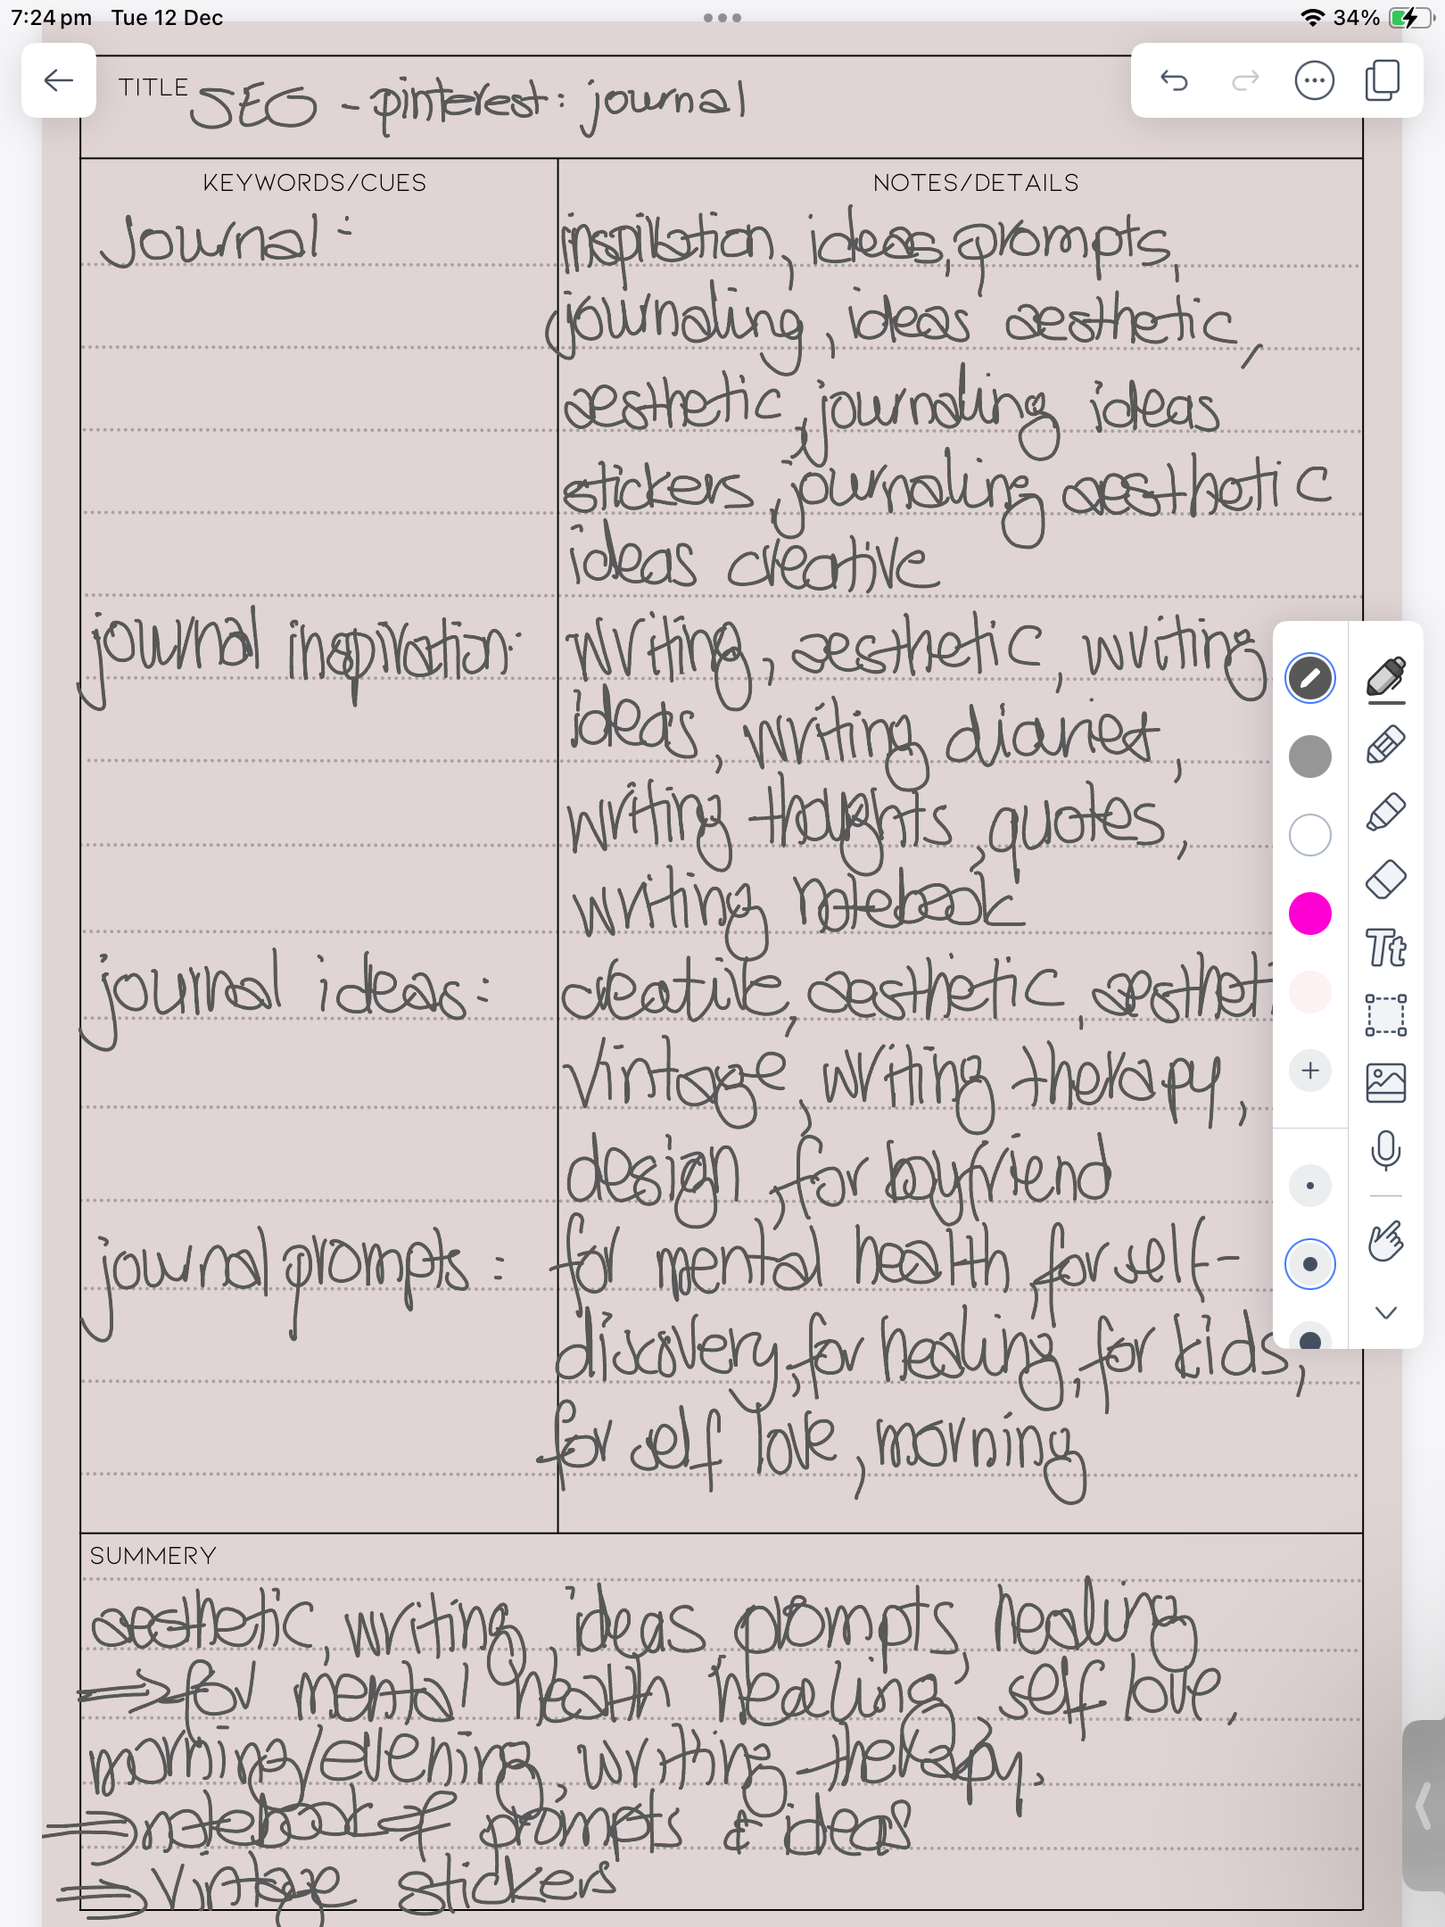 free download: digital Cornell notes in seven hand curated tones (freebie gift!)